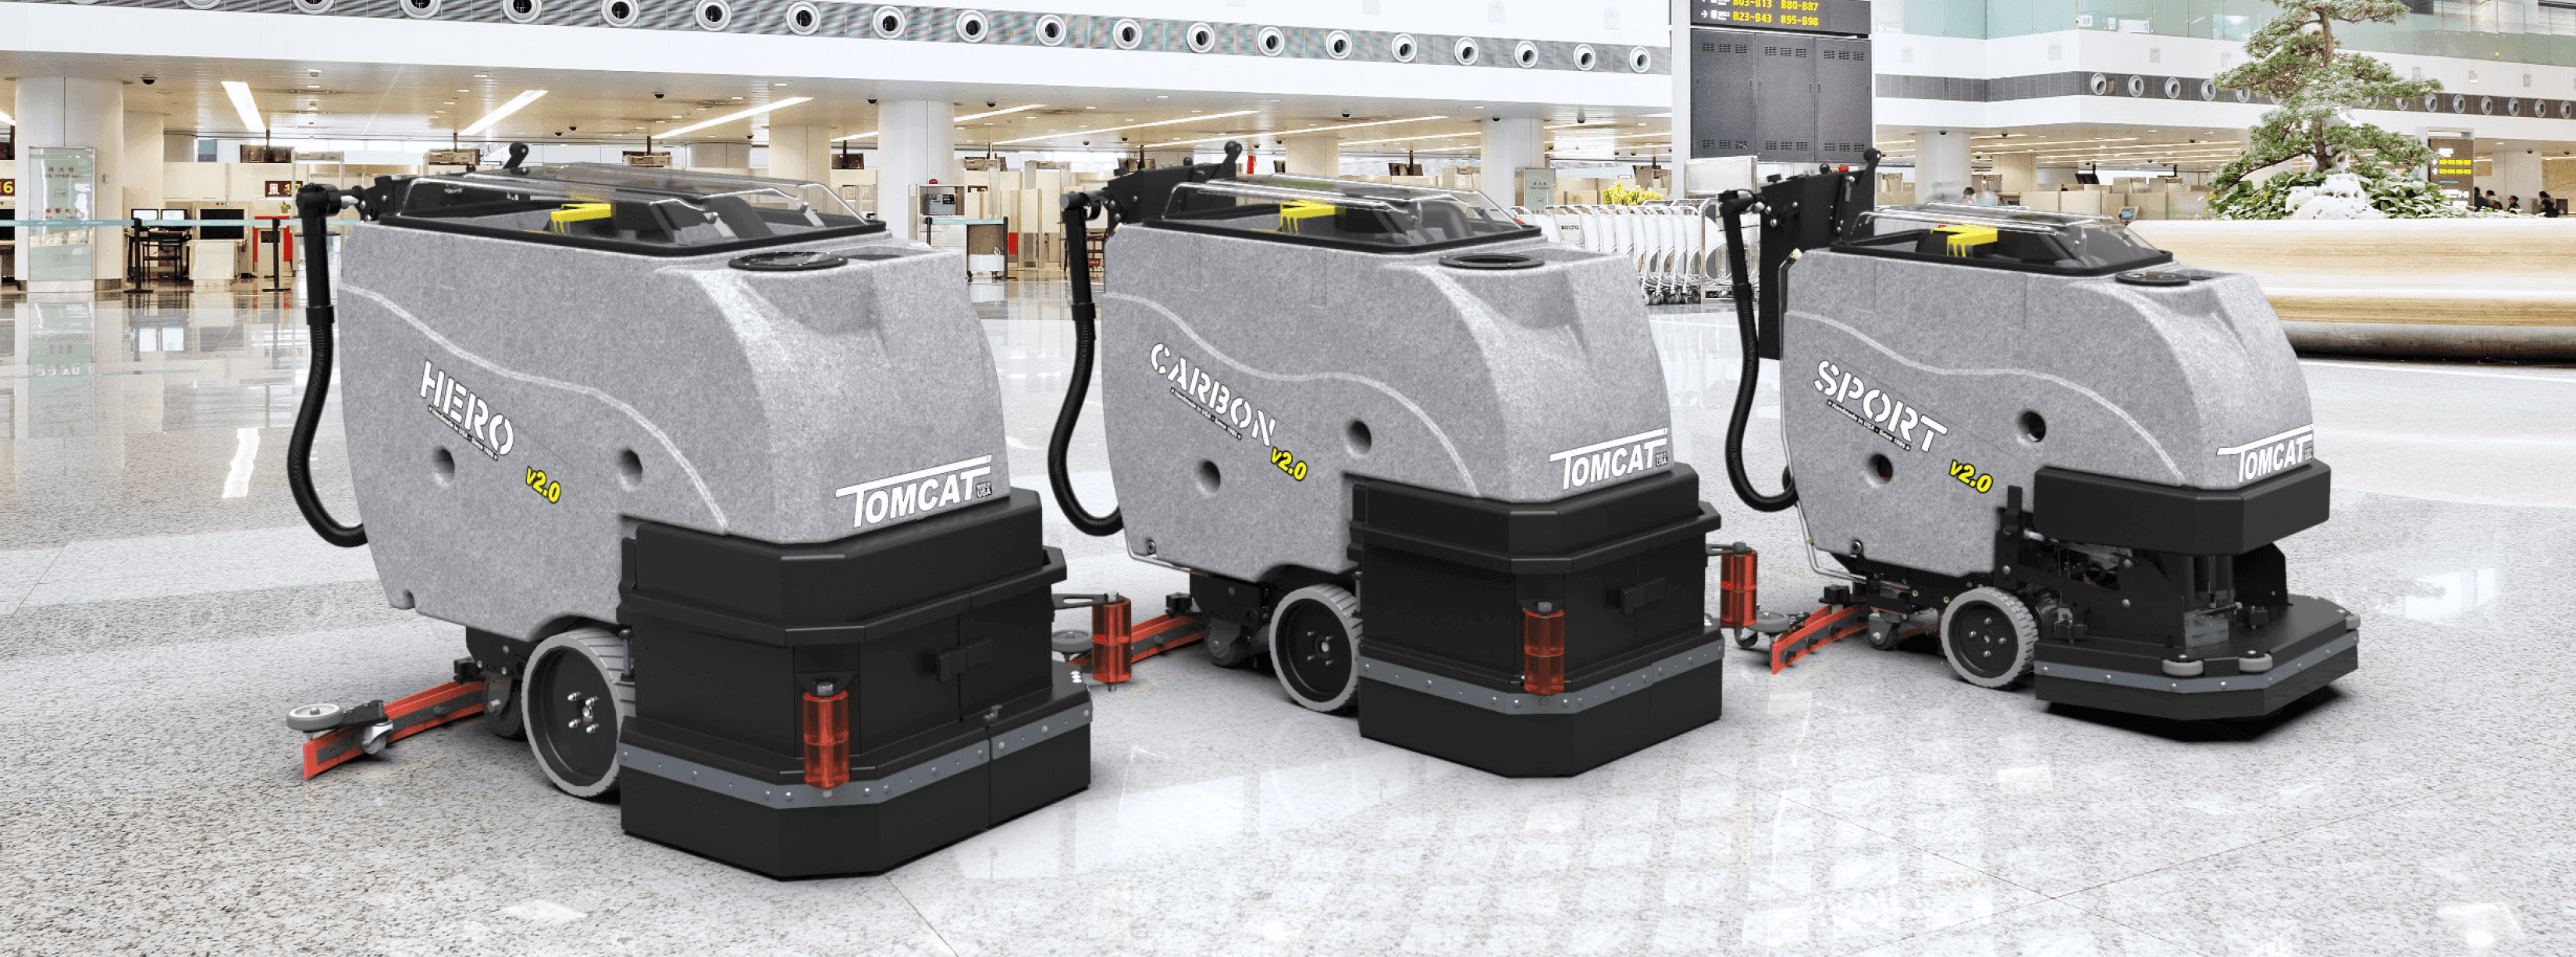 Tomcat Floor Scrubbers And Sweepers Made In America